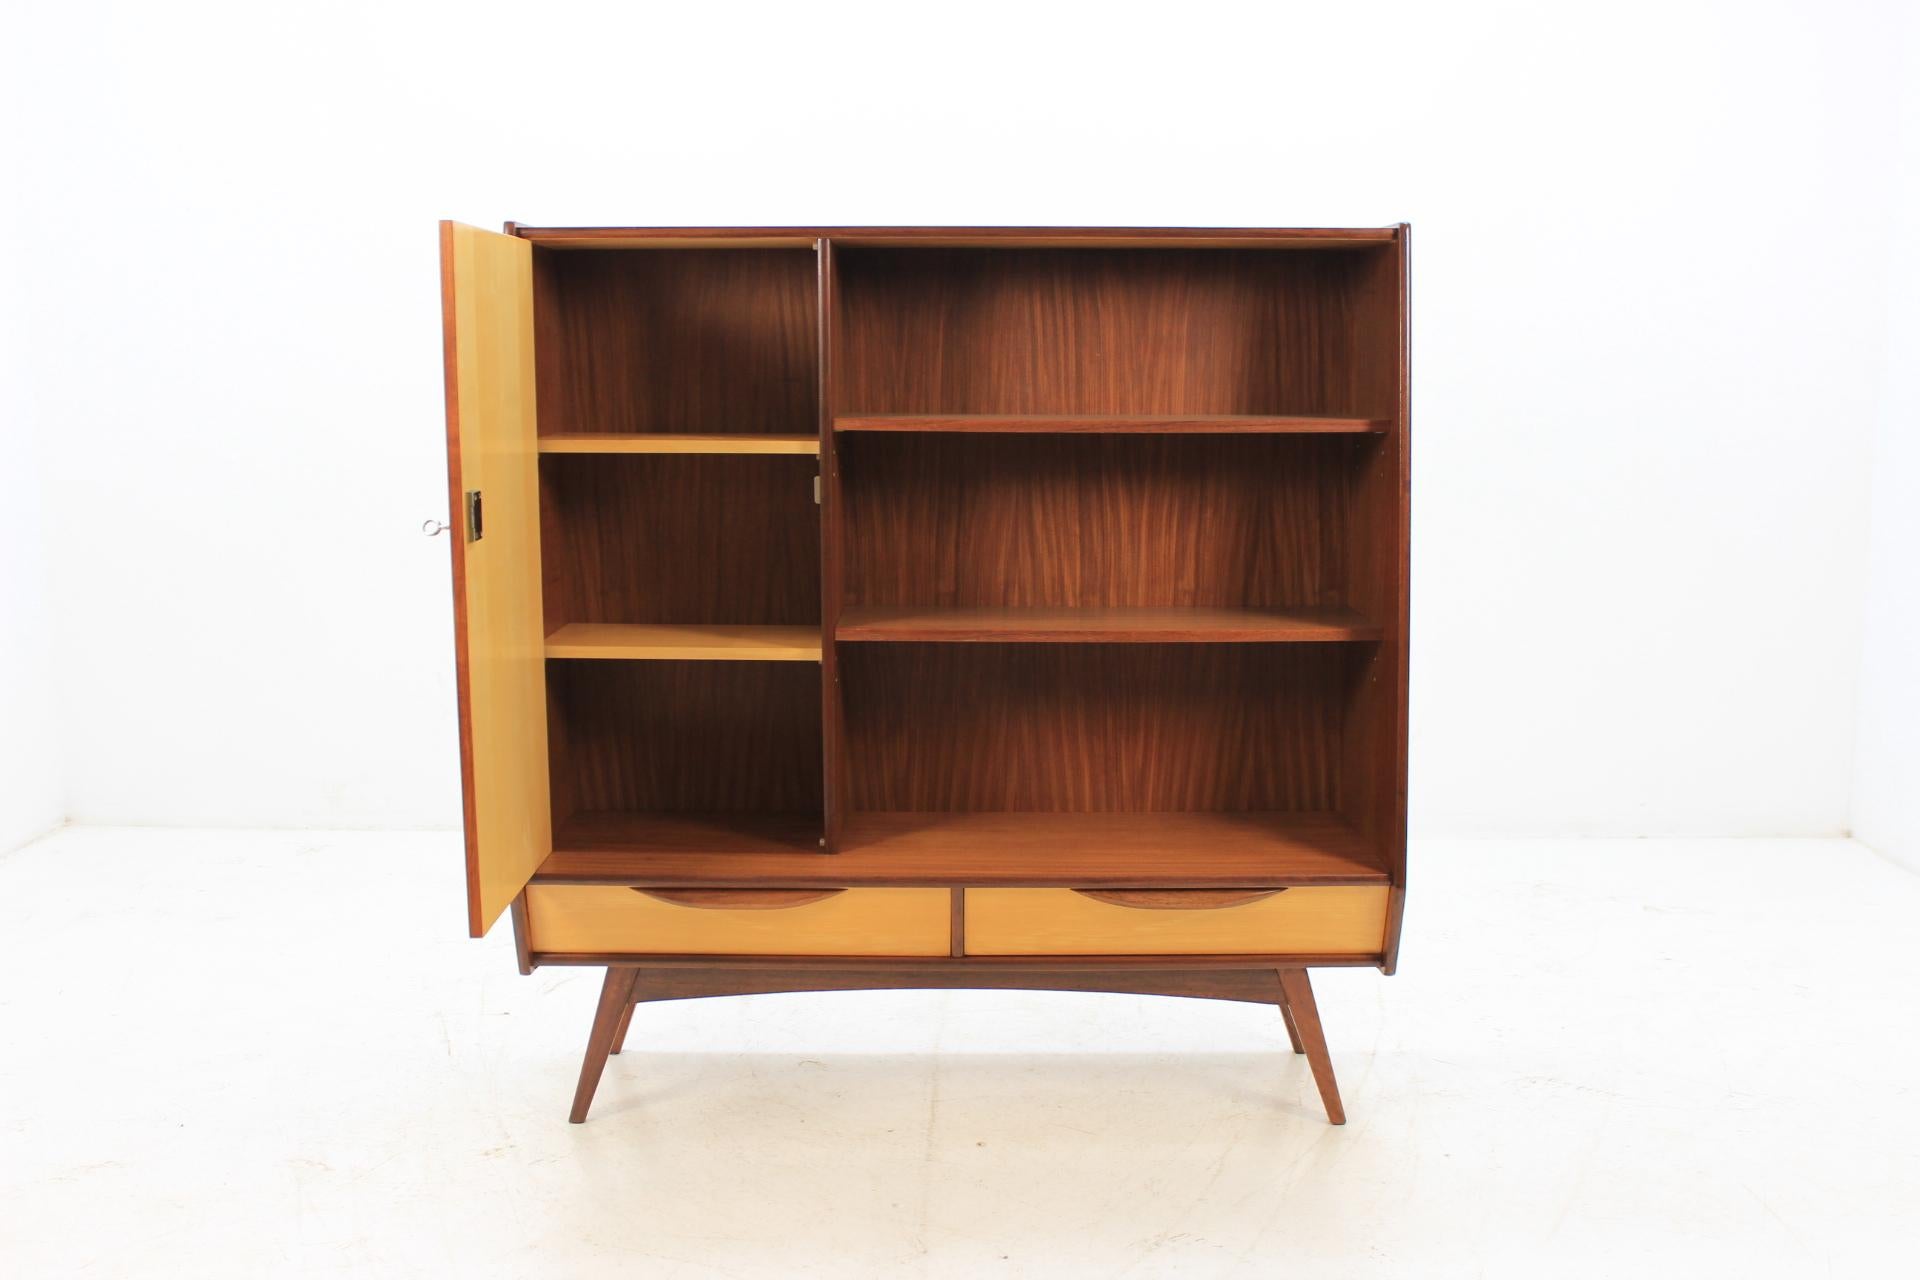 This cabinet features two shelves, one-door compartment with two inner shelves and two drawers. This item was carefully restored.